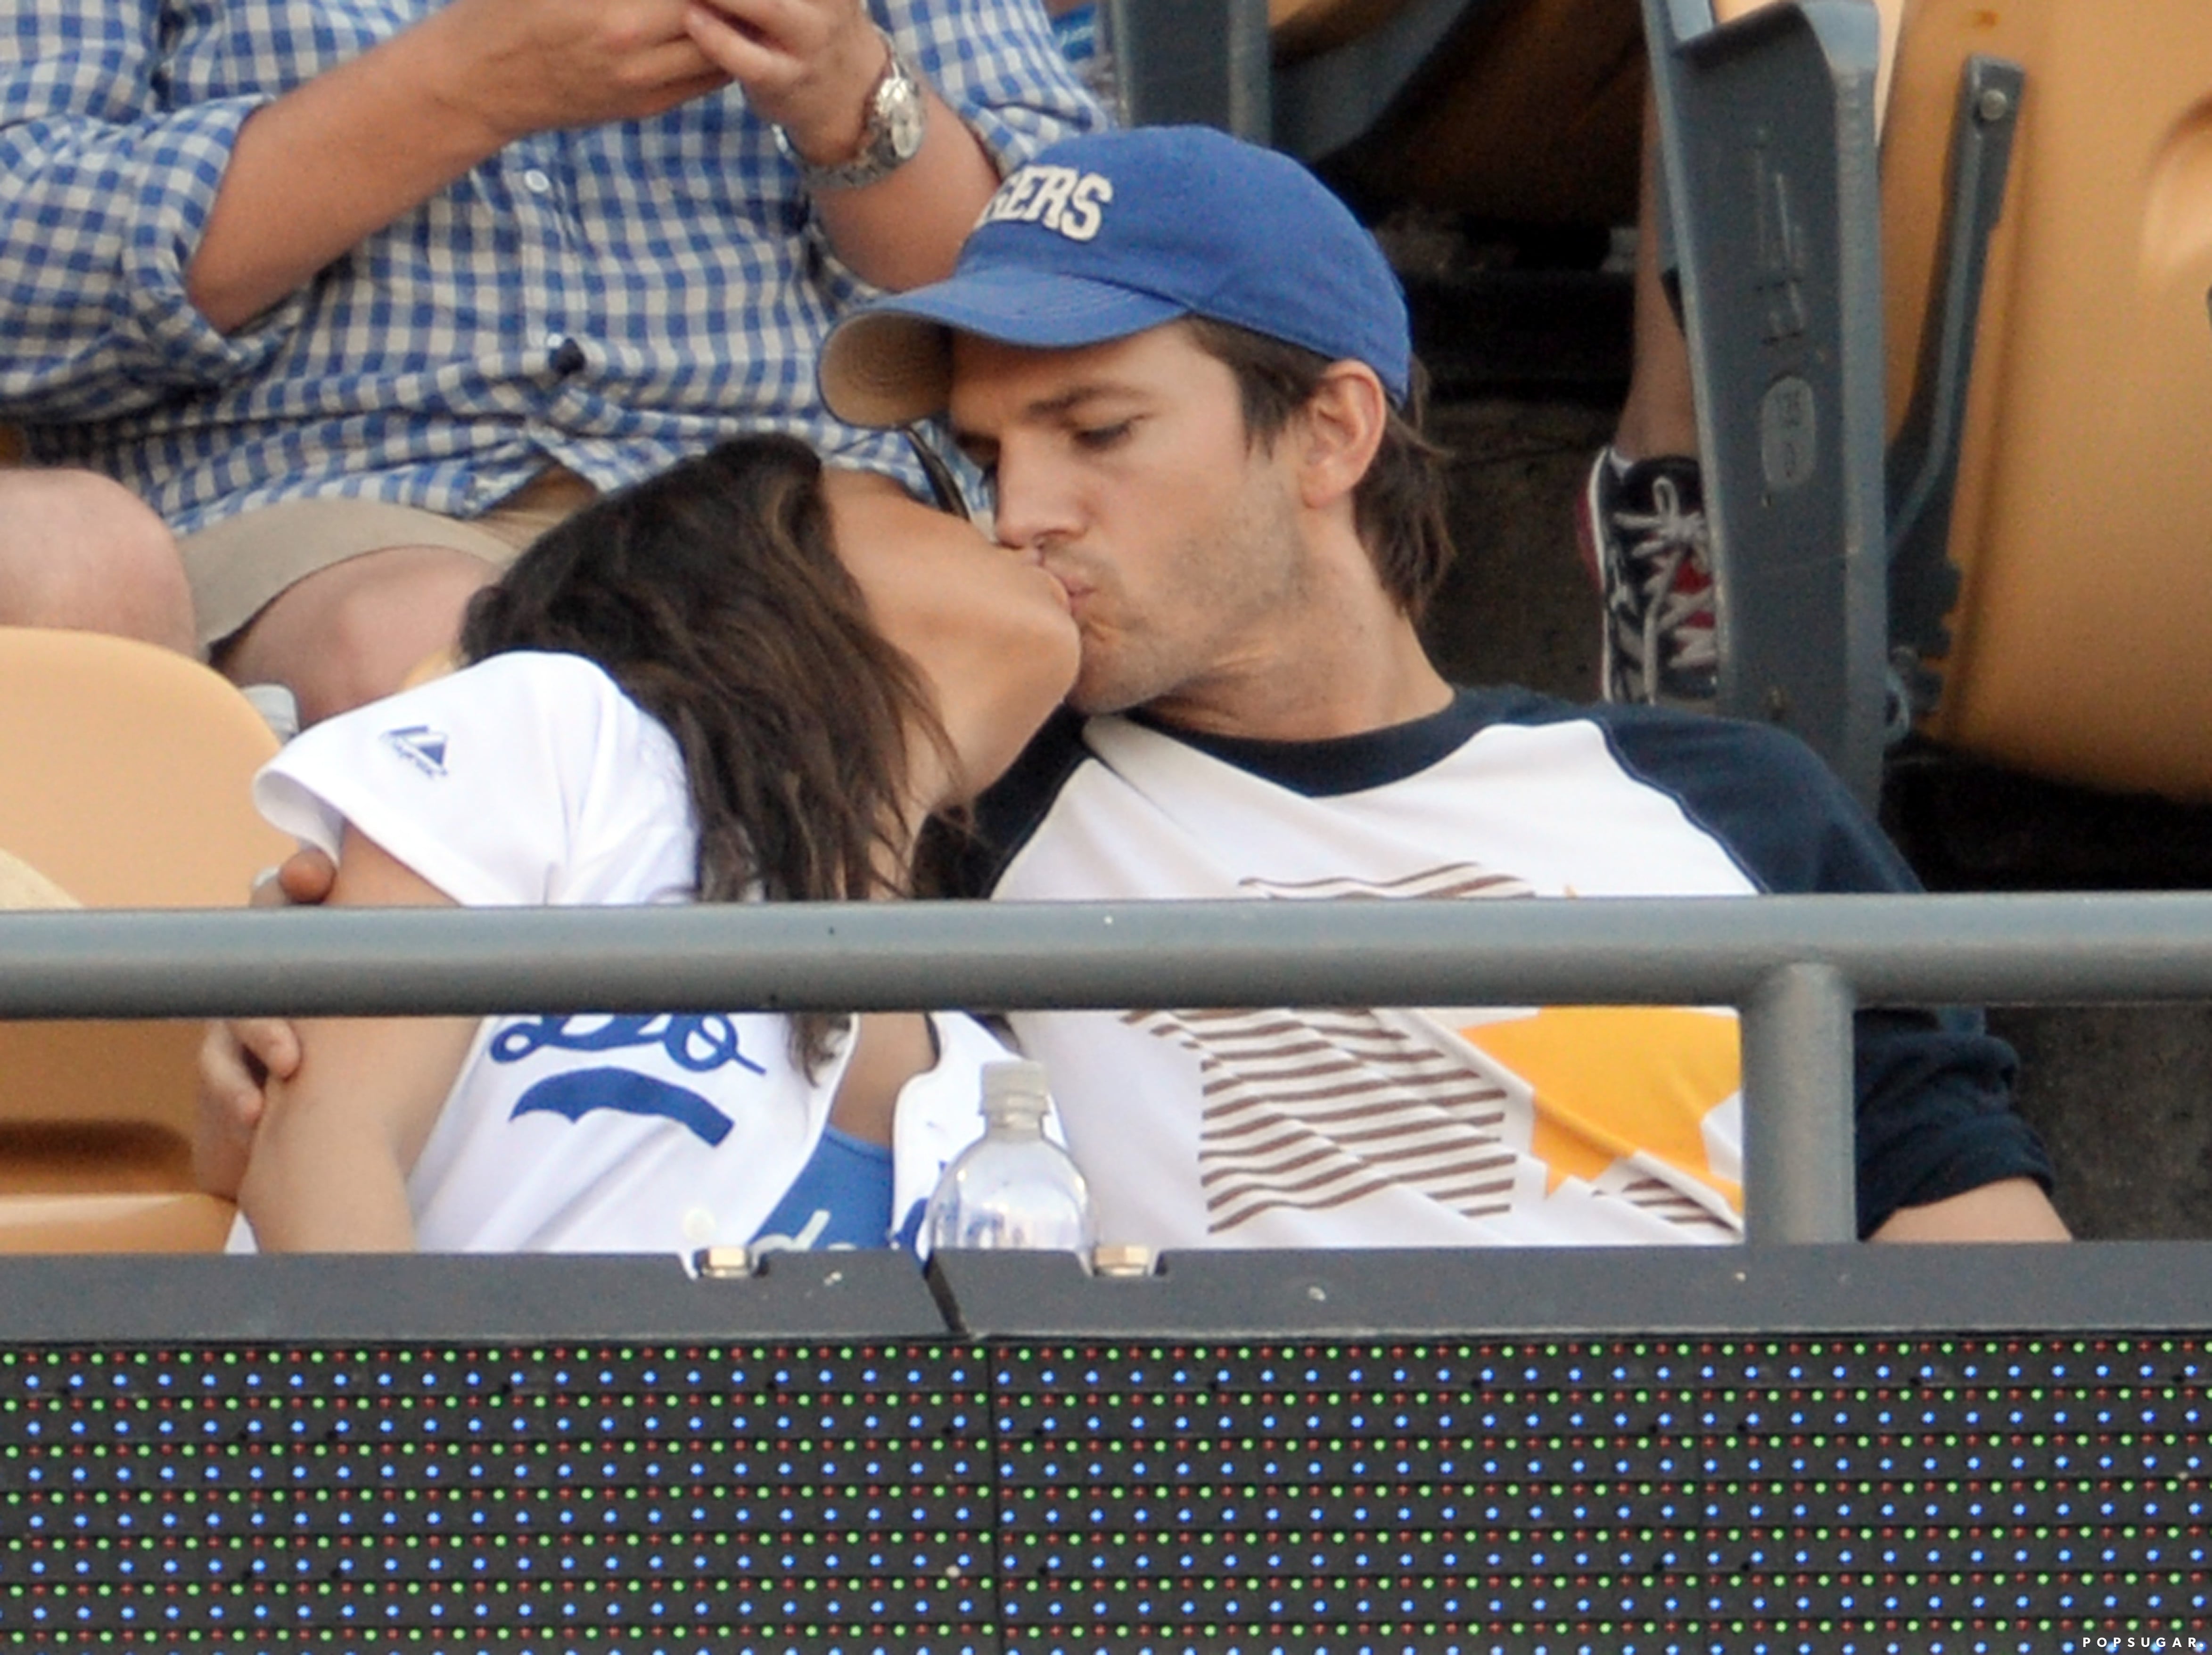 Ashton Kutcher and Mila Kunis Head to Dodgers Game for Date